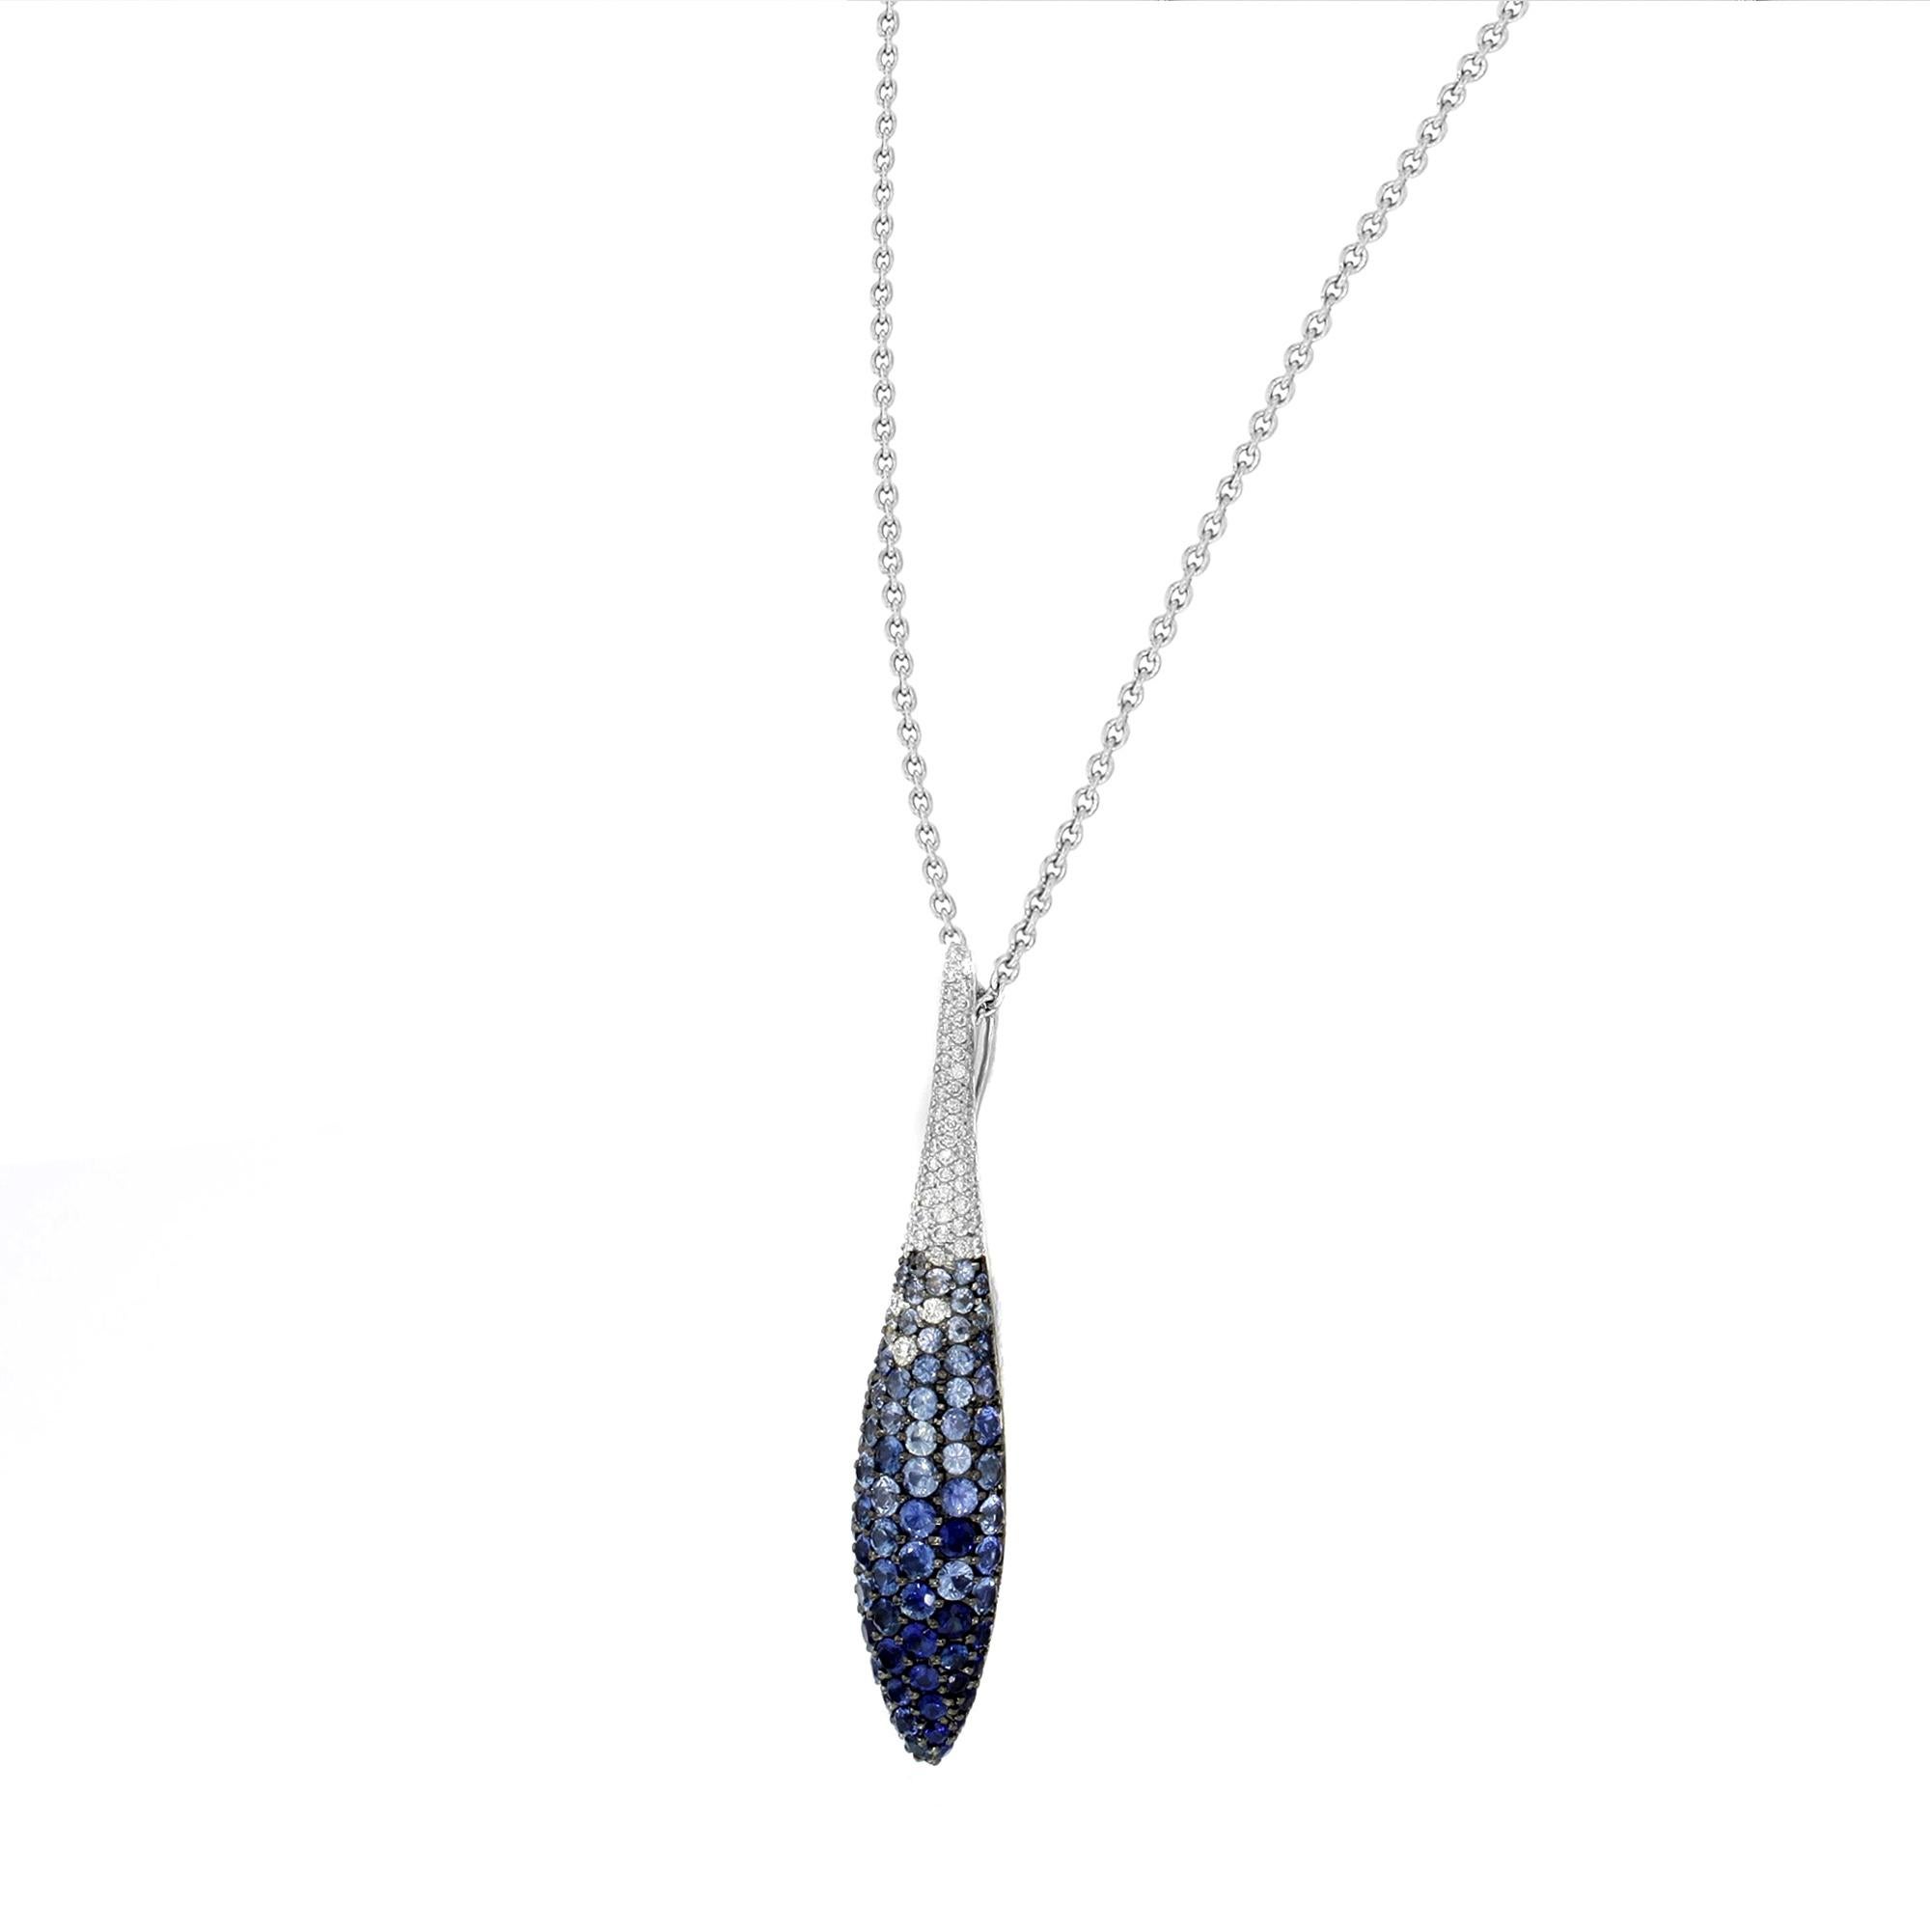 This beautiful necklace is crafted in 18K white gold with pave set round cut diamonds weighing appx. 0.28 cttw. and round cut blue sapphires weighing 1.98 cttw. Chain length: 16 inches. Pendant length: 40 mm, width: 7.25 mm, thickness: 5.25 mm.